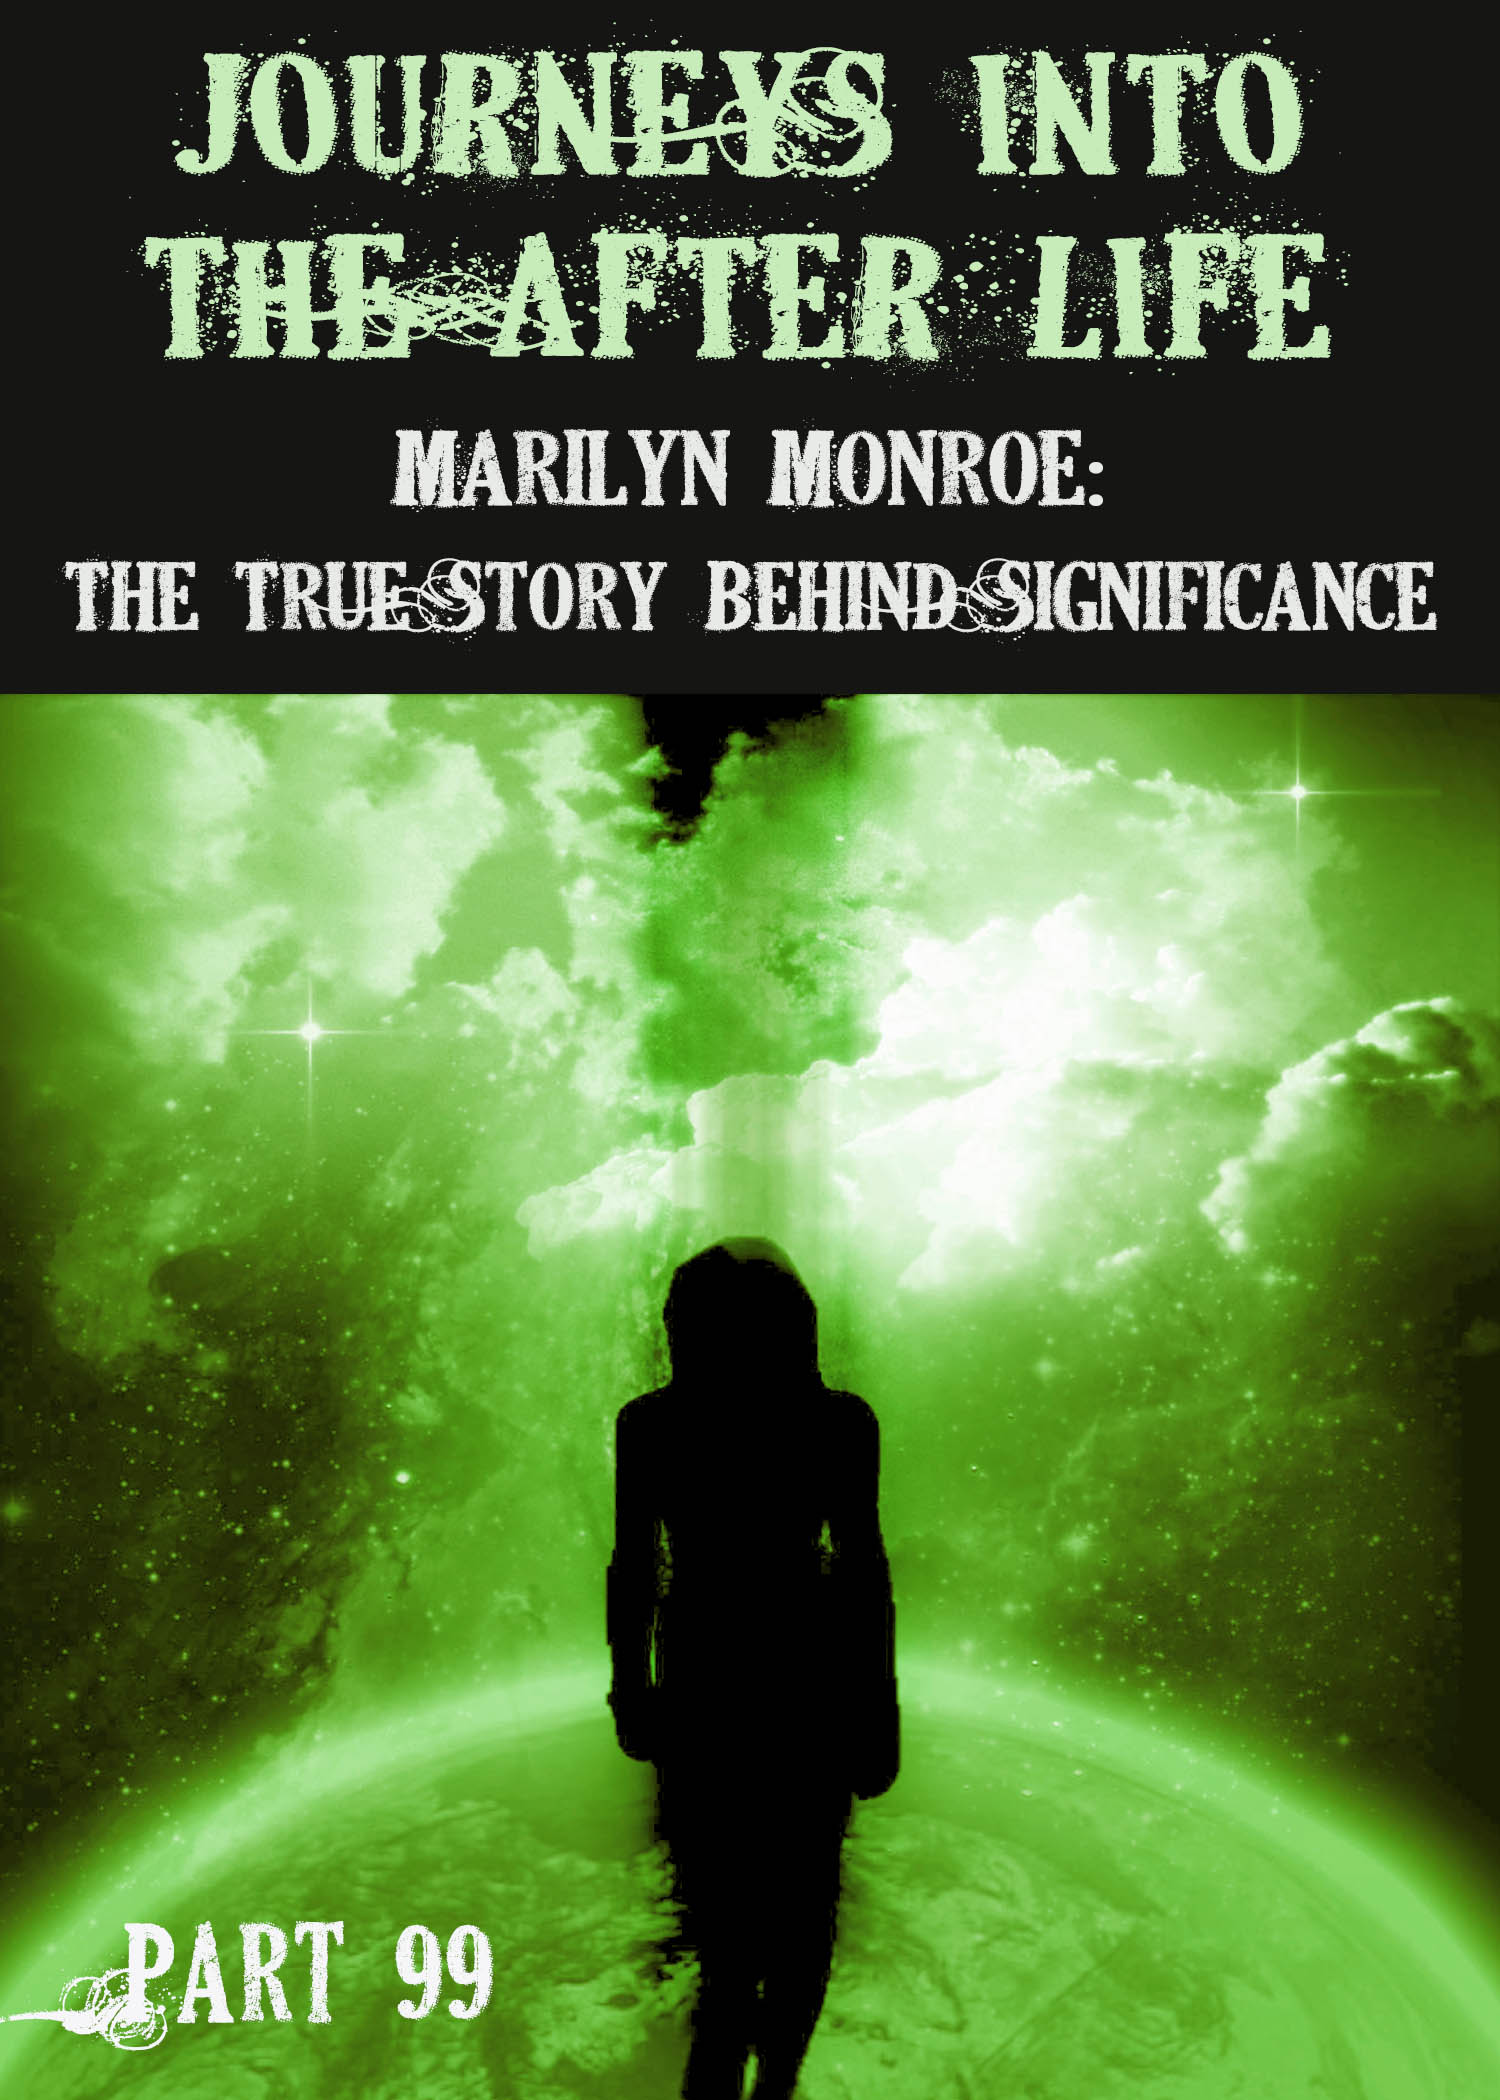 Marilyn Monroe The True Story Behind Significance Journeys Into The Afterlife Part 99 Eqafe